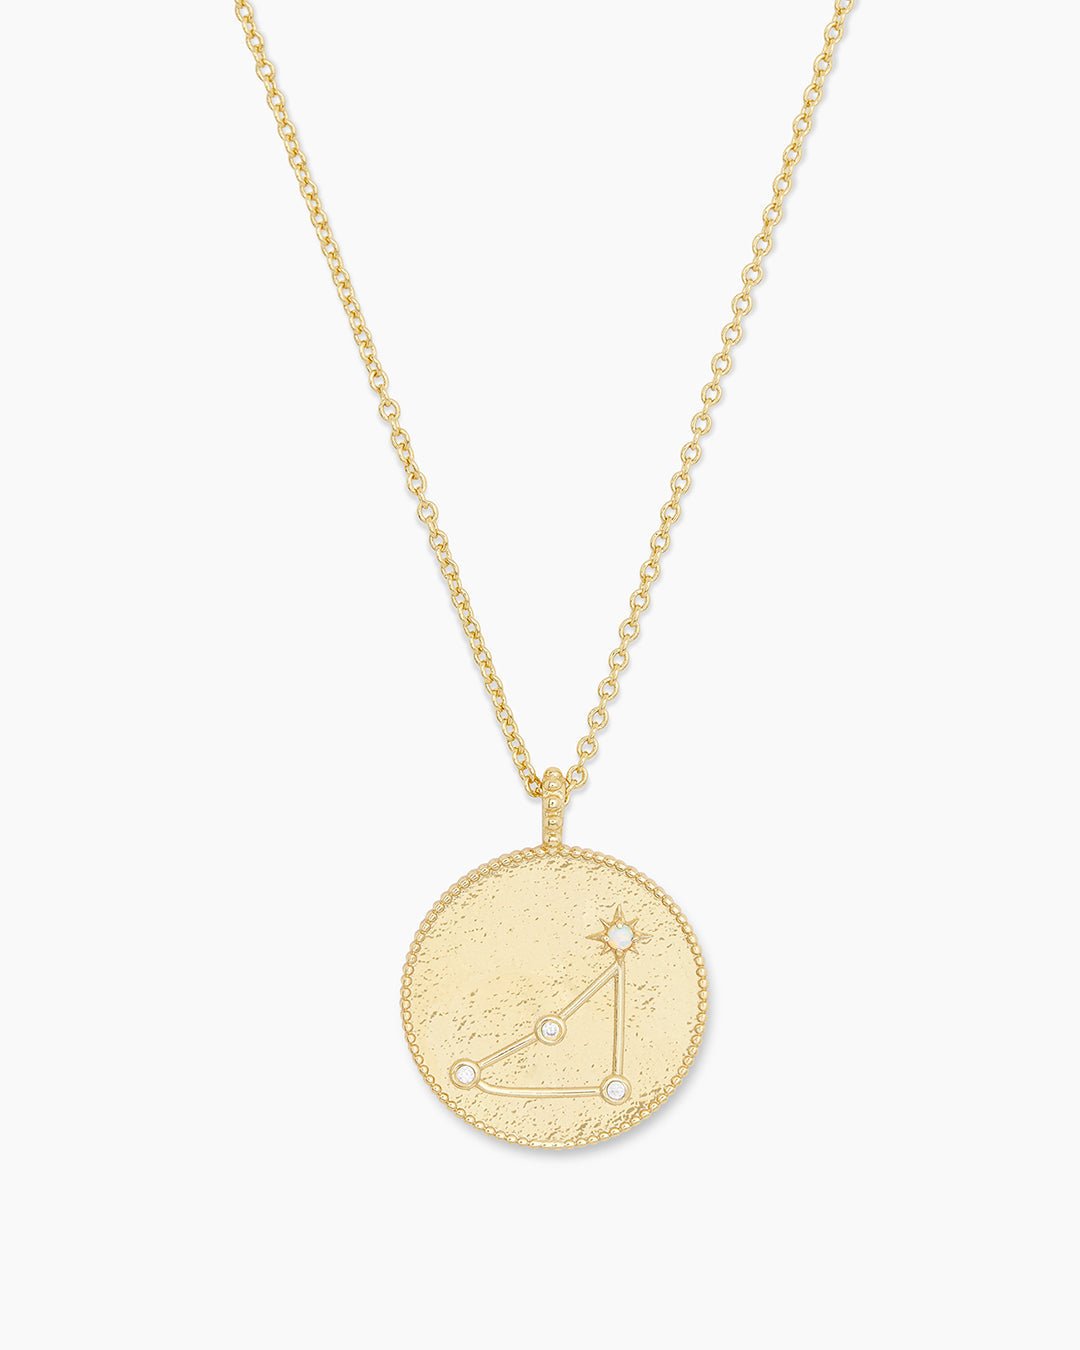  Astrology Coin Necklace (Capricorn) || option::Gold Plated, Capricorn